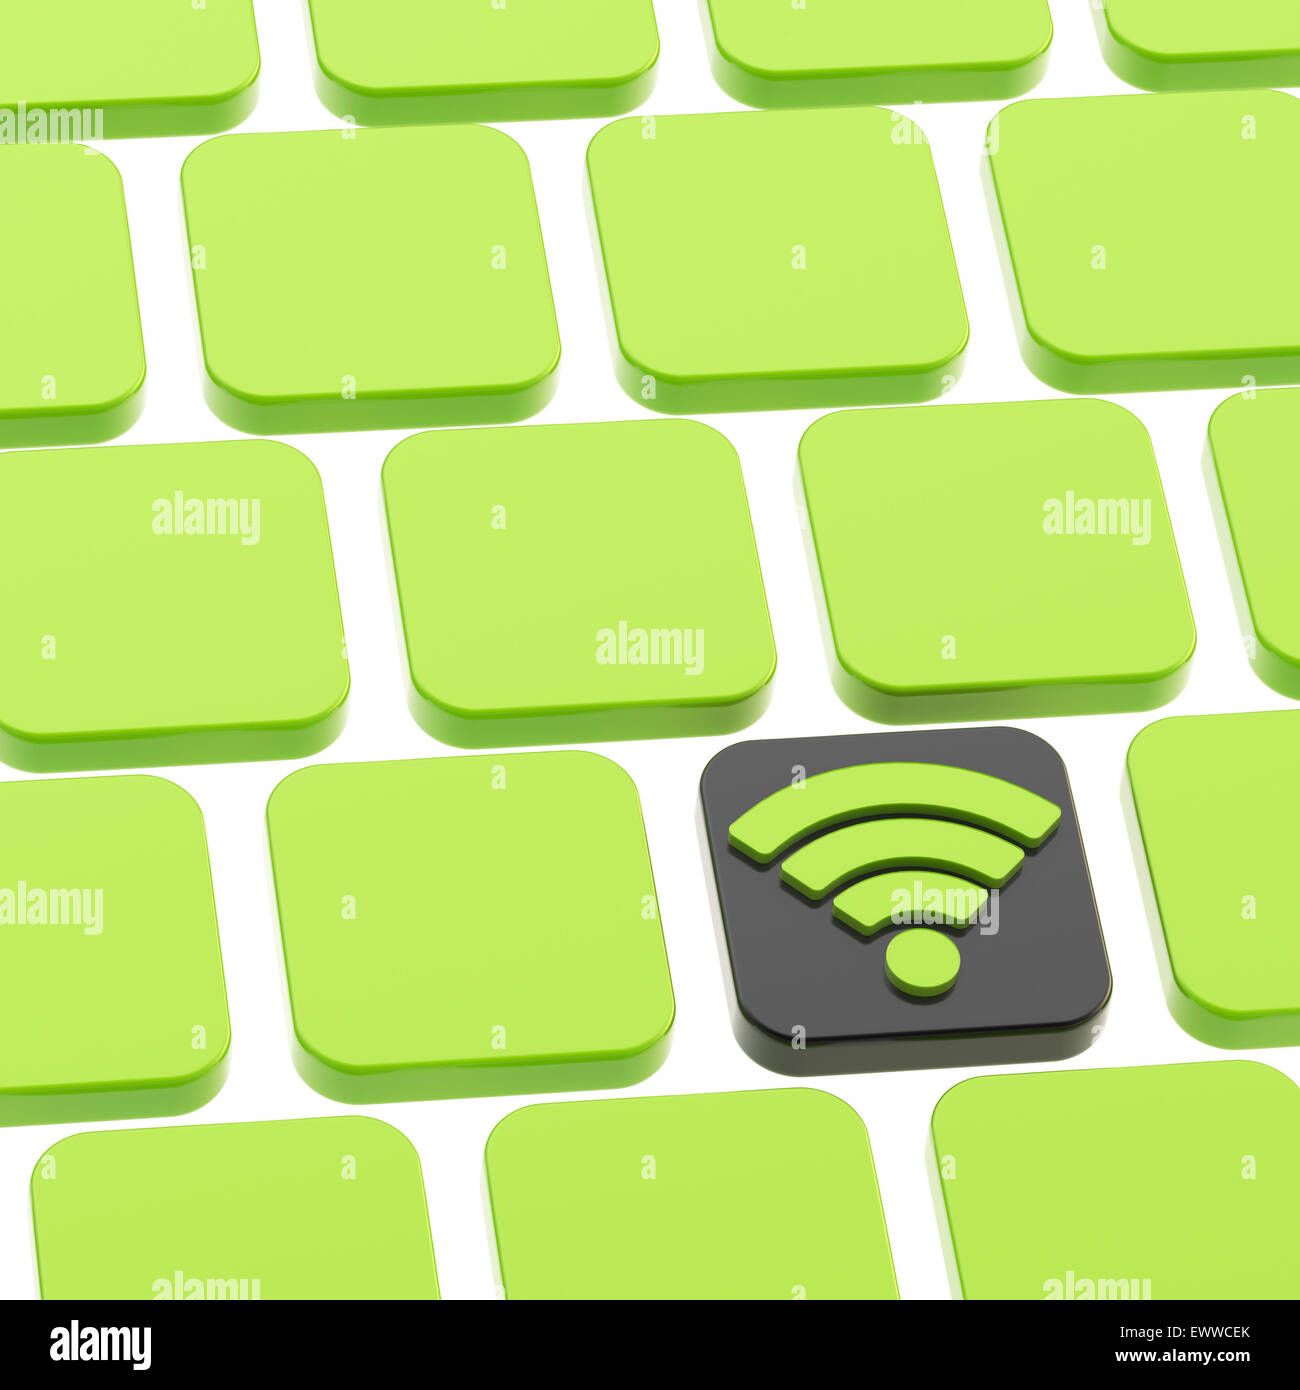 Wifi keyboard button composition Stock Photo